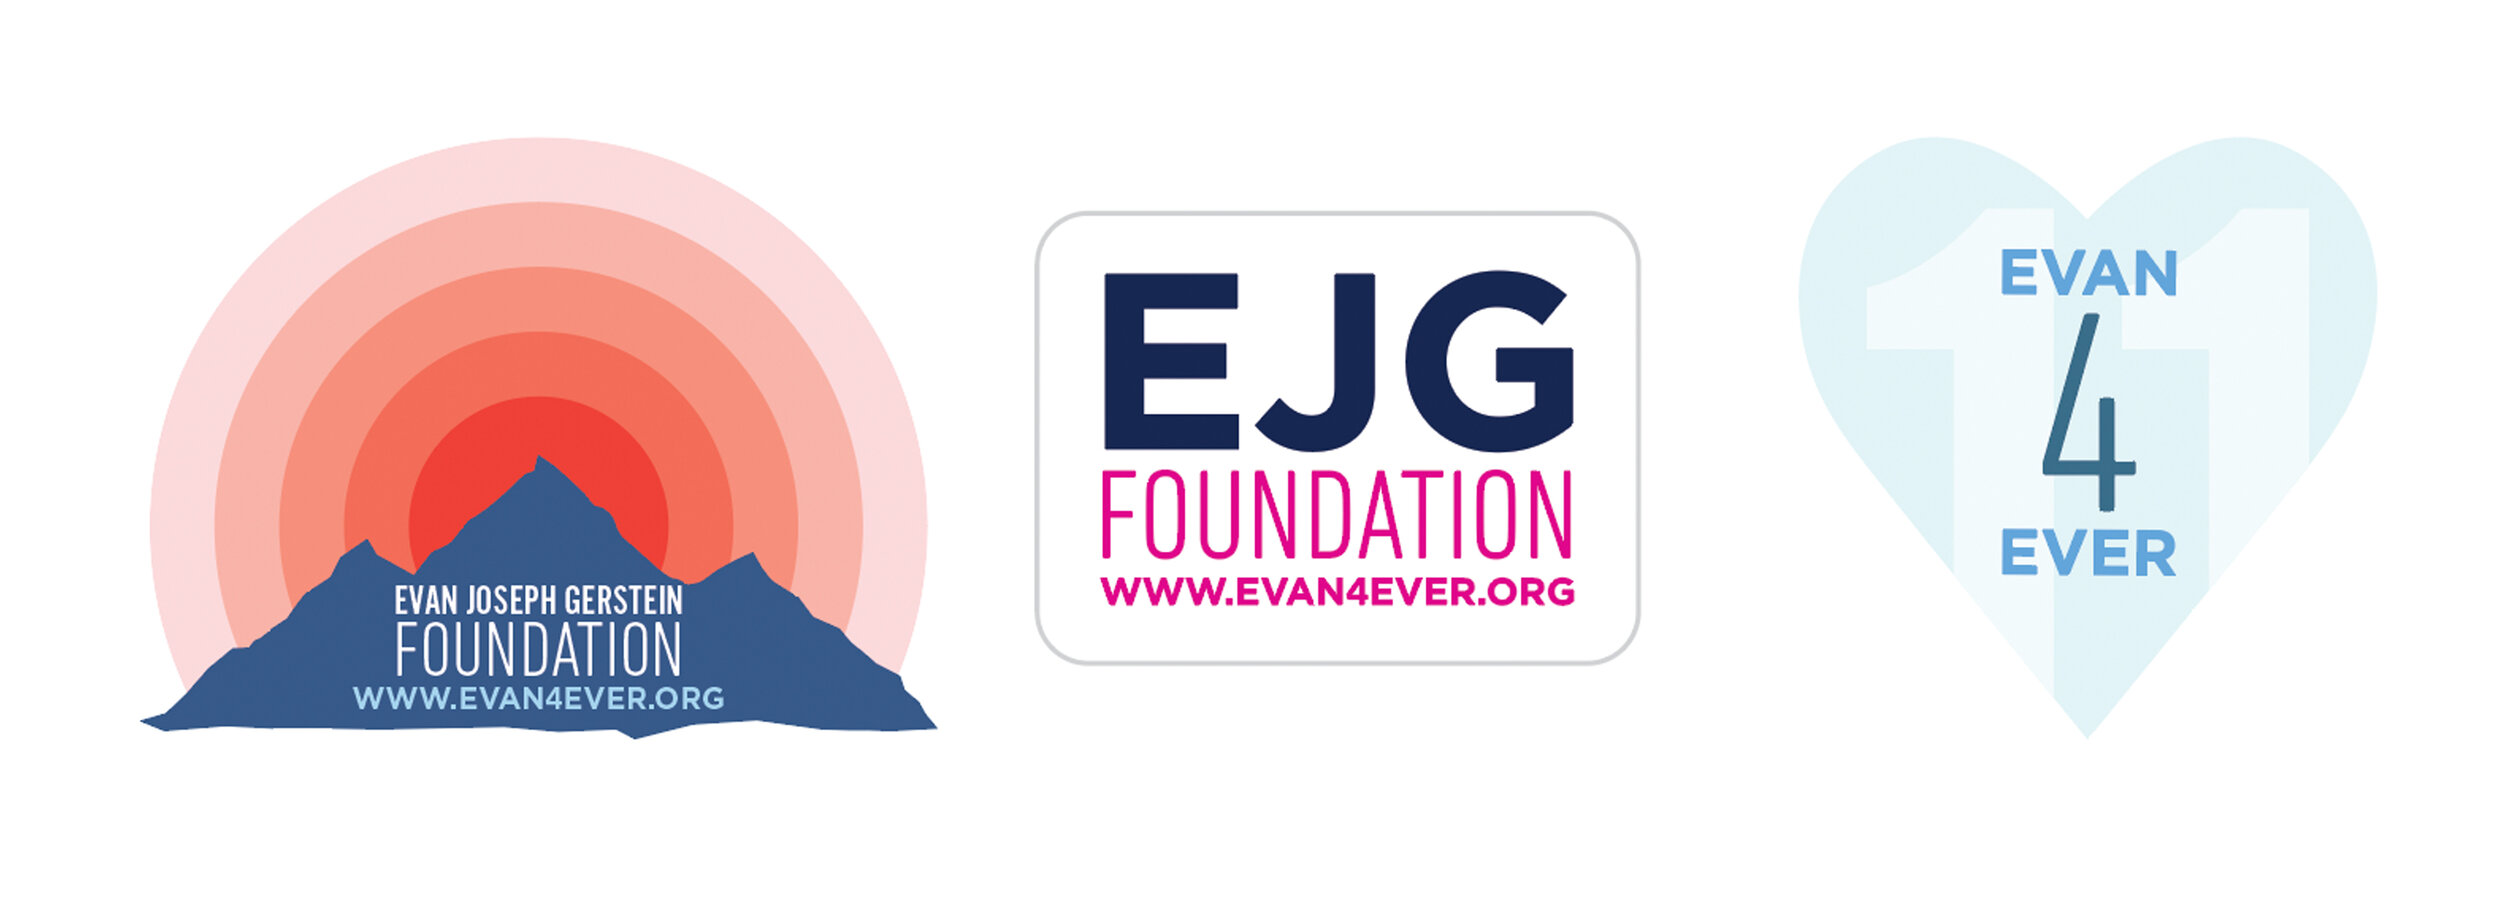 EJG Foundation Collectable Sticker package (3 stickers)